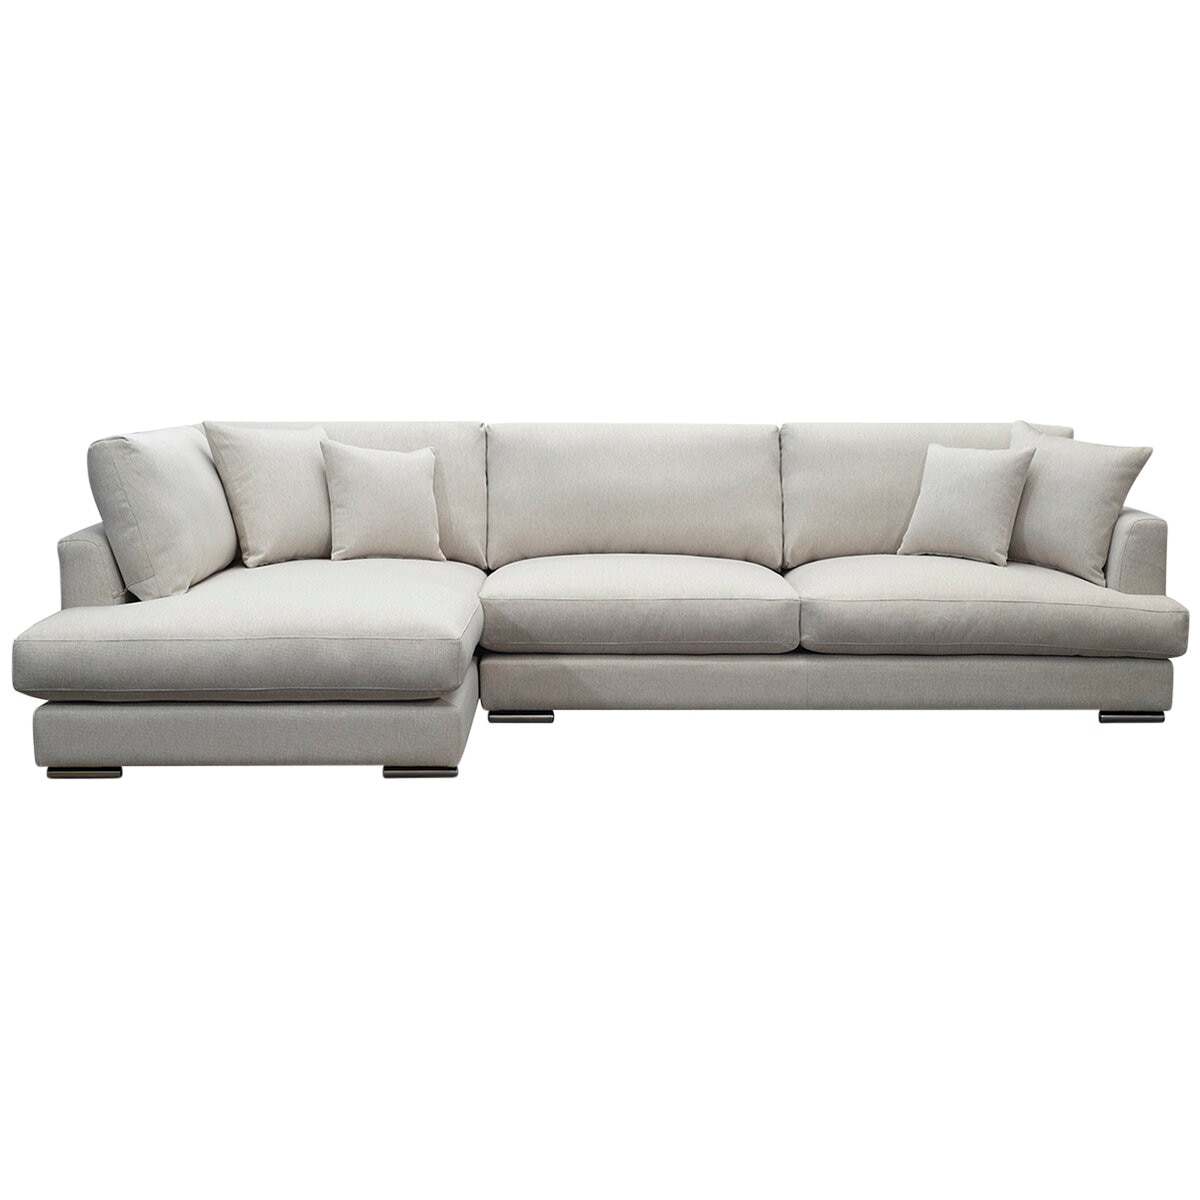 Moran Treviso 2.5 Seater Fabric Sofa with Chaise Bodhi Linen